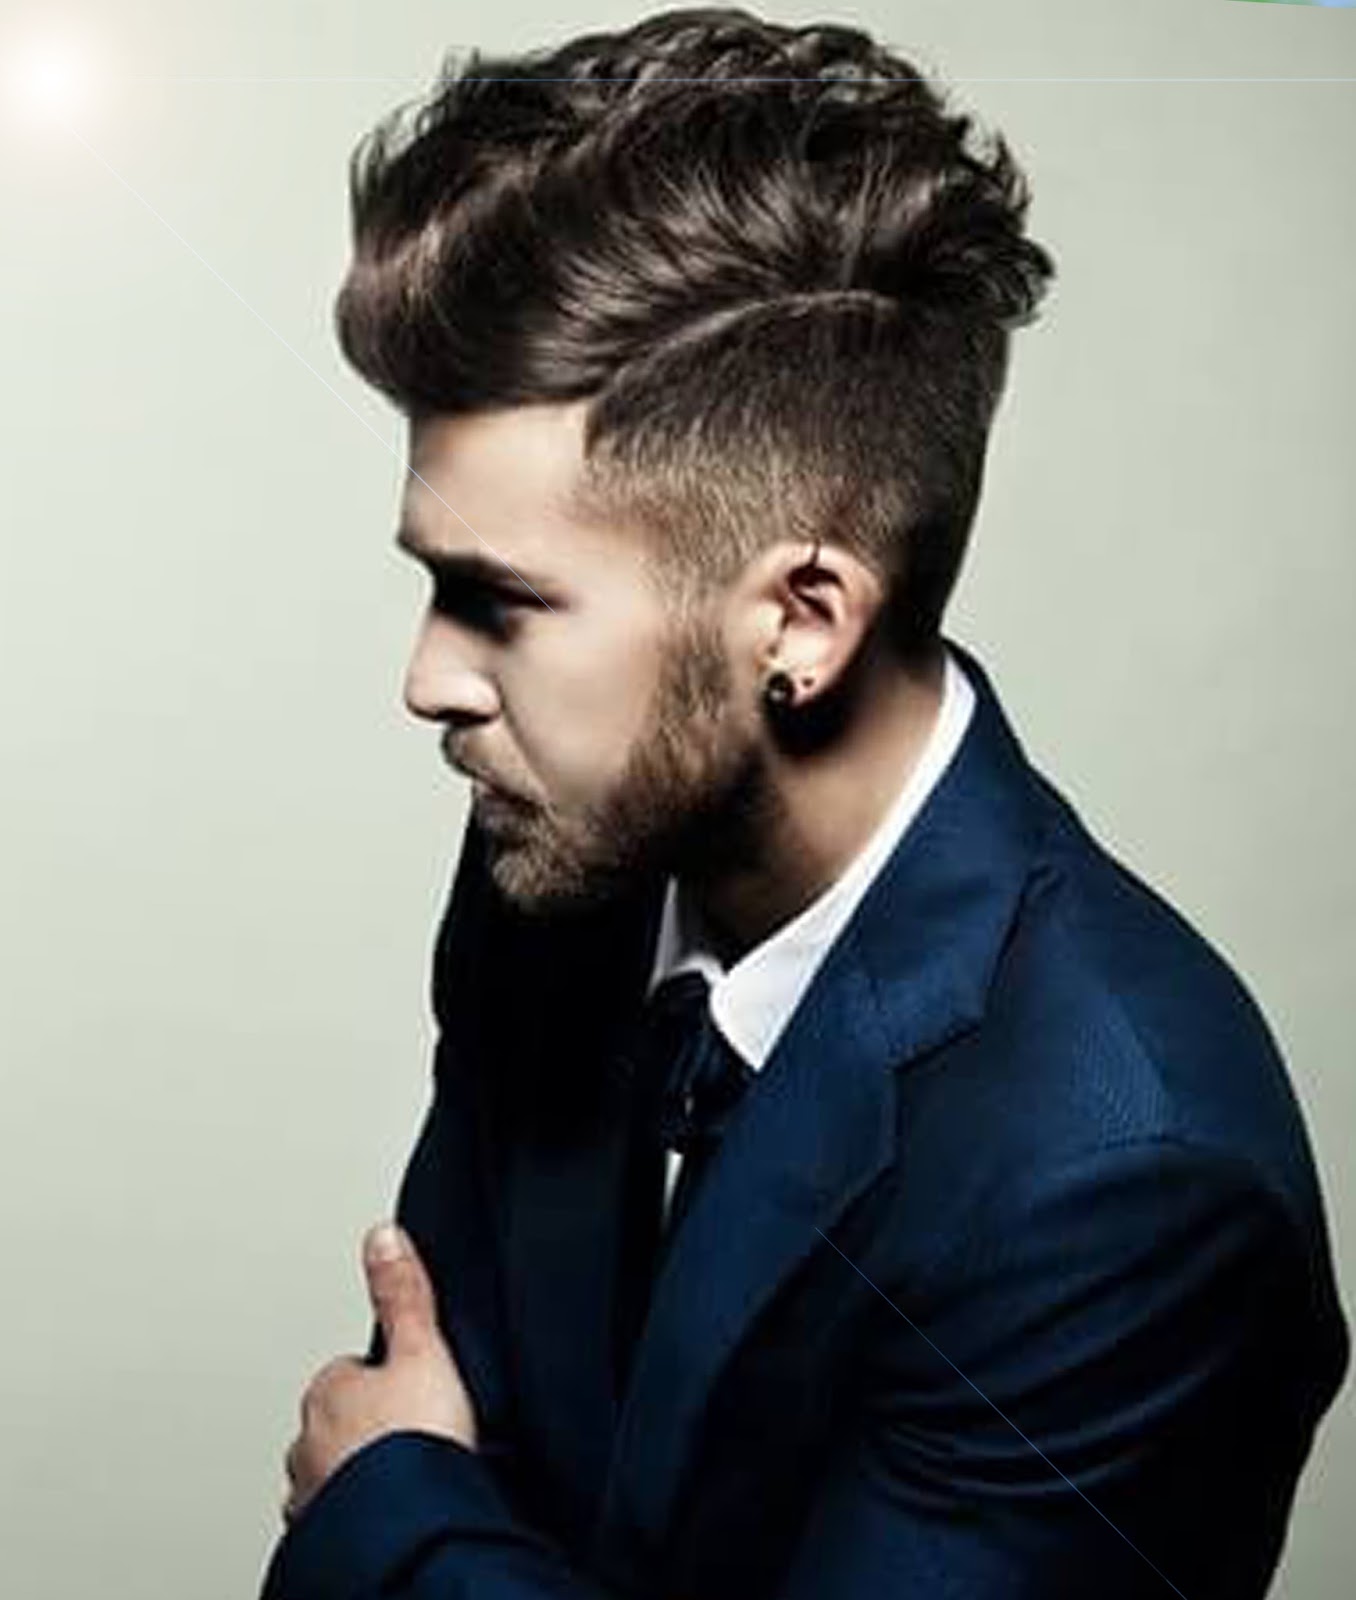 Top 5 Undercut Hairstyles For Men | Hairstyles Spot